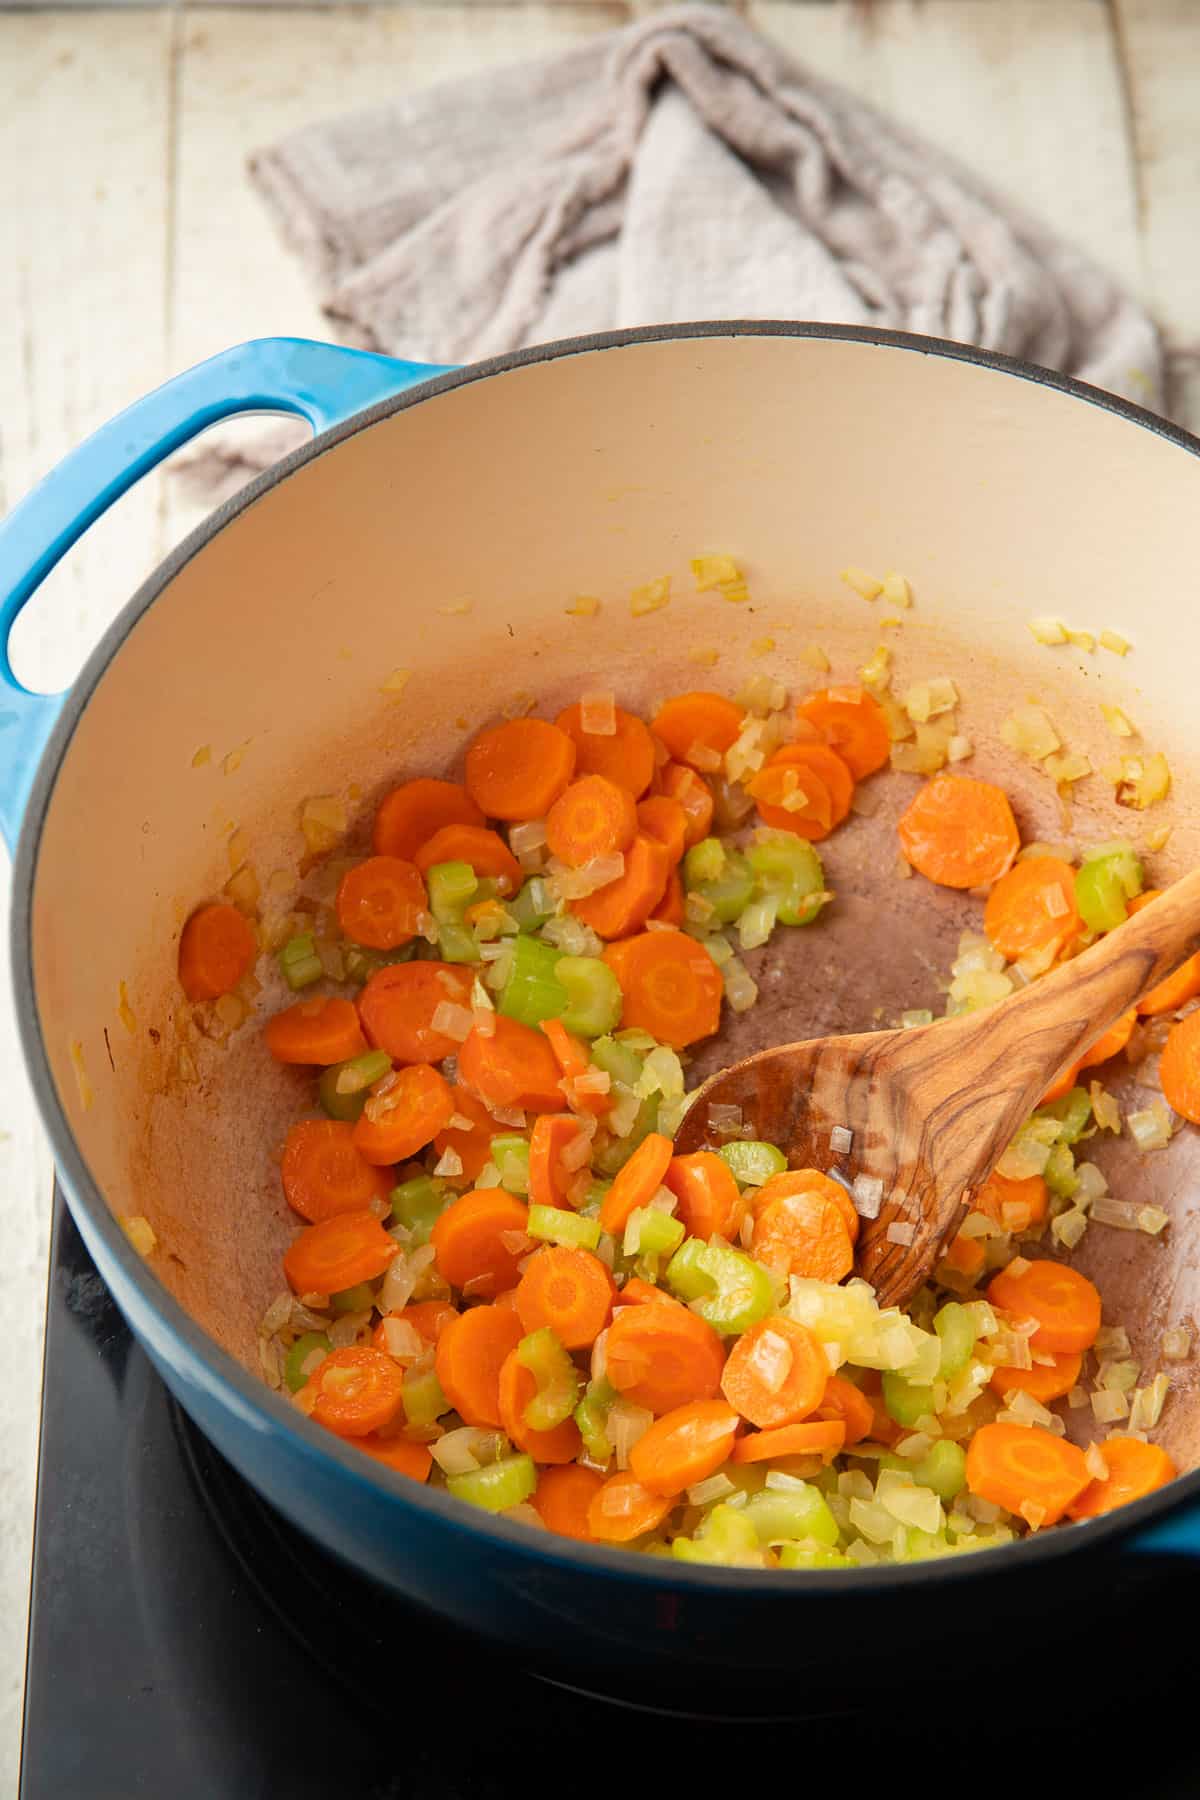 Carrots, onions, and celery cooking in a pot.